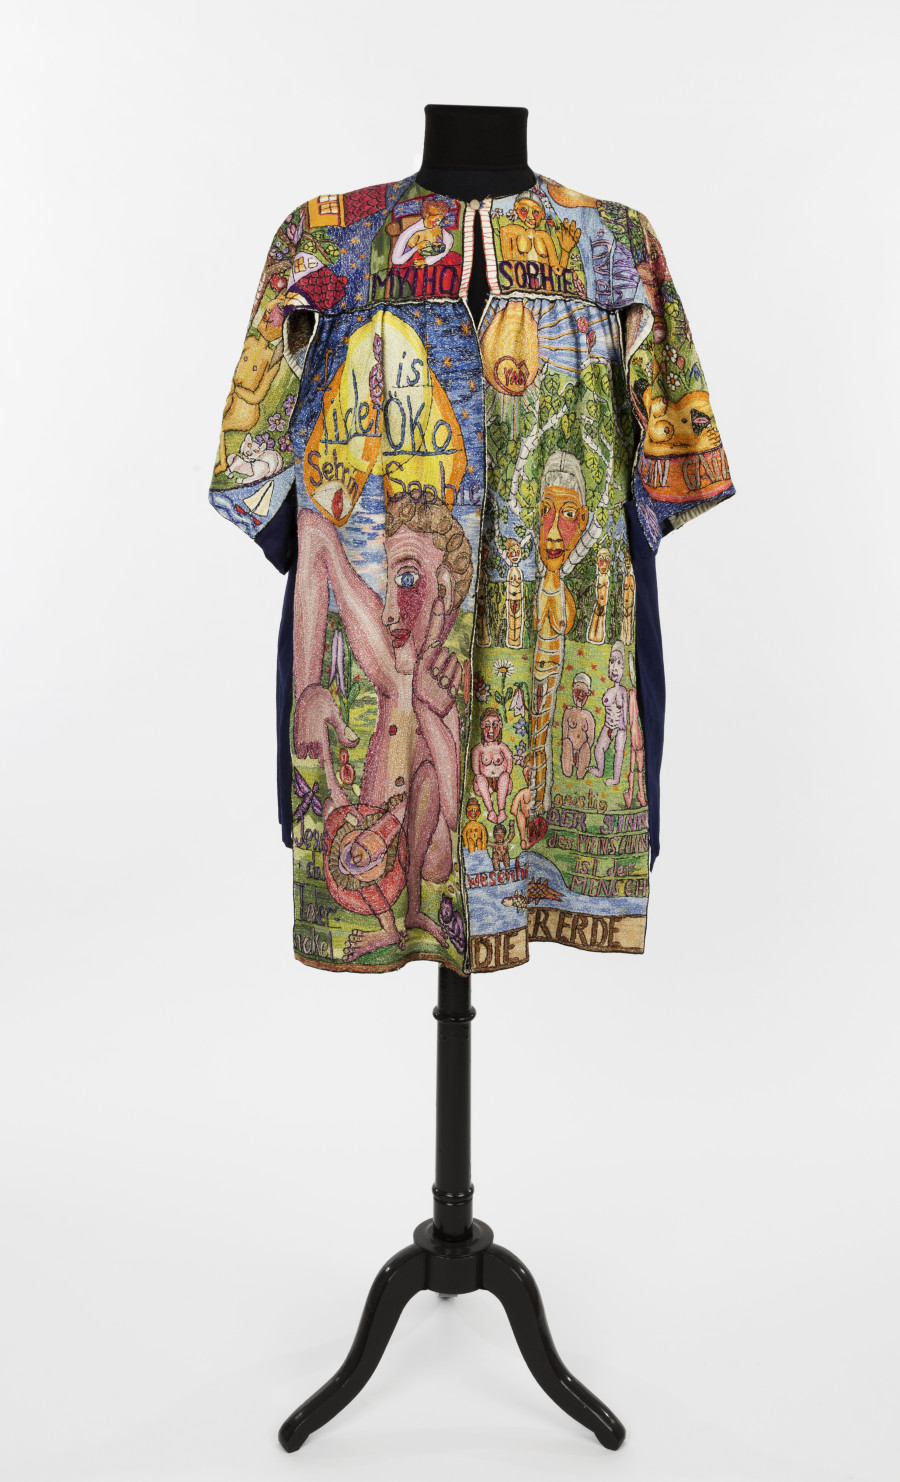 Helga Sophia Goetze Mytho Sophie, between 1970 and 2007 embroidery on fabric, 87 x 65 x 35 cm photo : AN – Collection de l’Art Brut, Lausanne